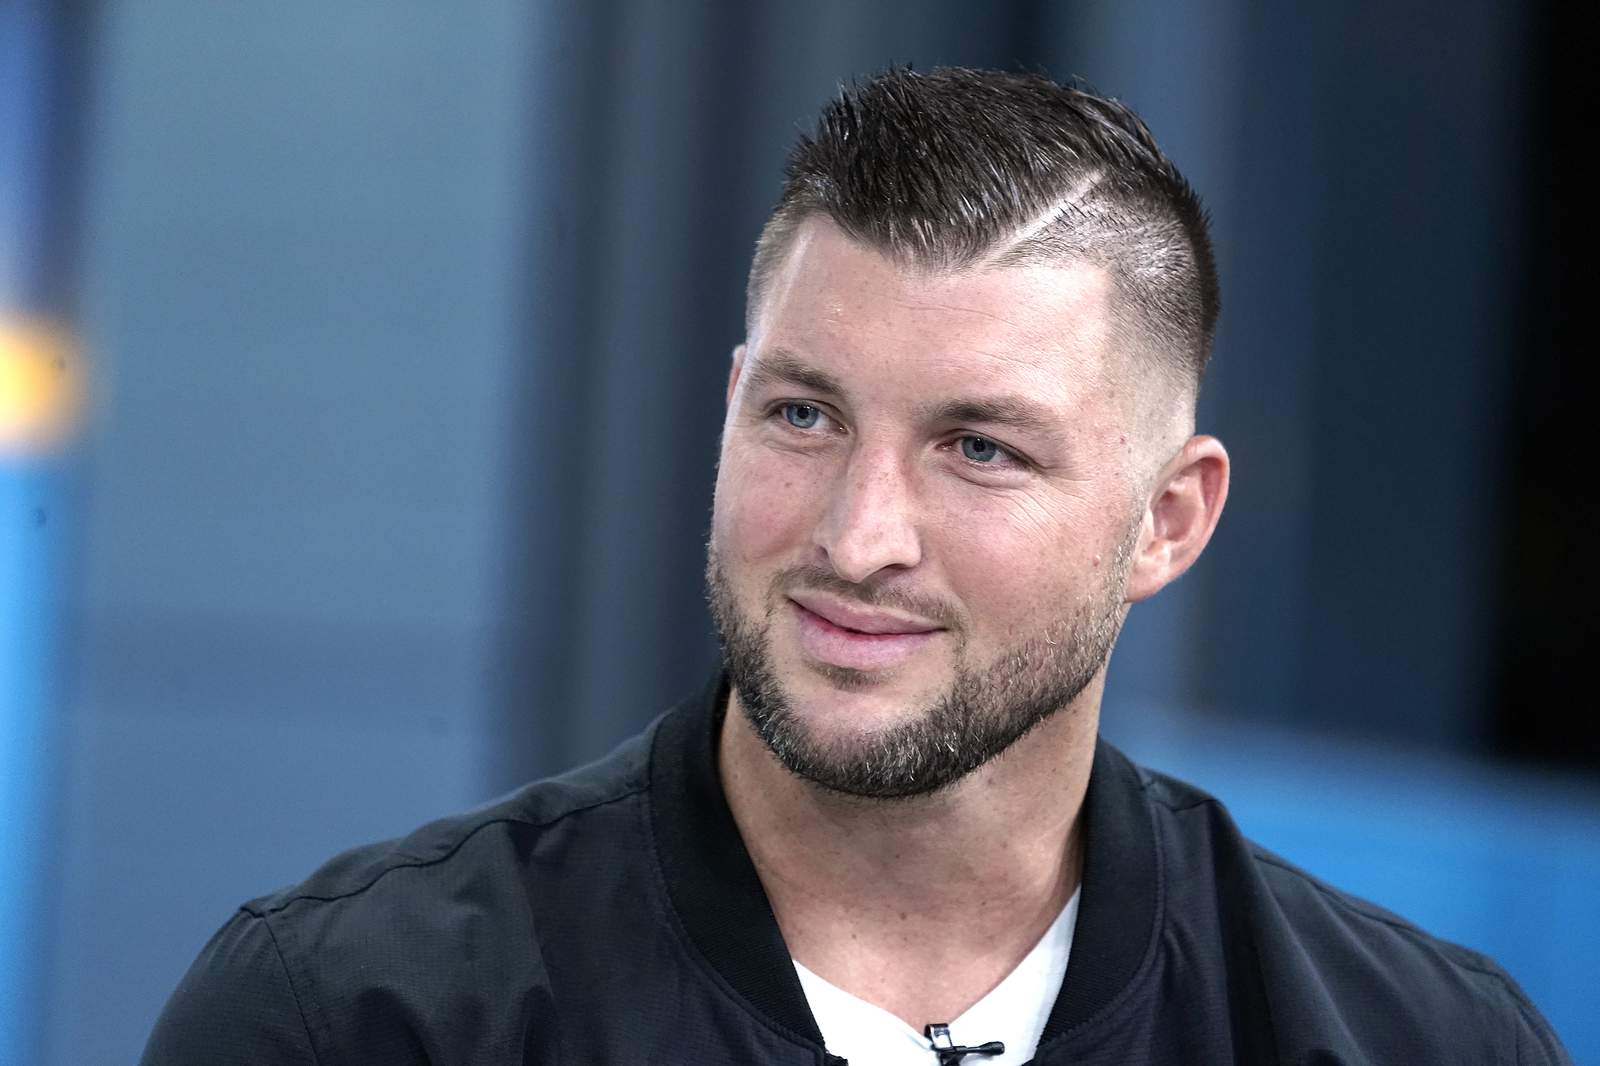 Tim Tebow delivers Easter message during church’s livestreamed service